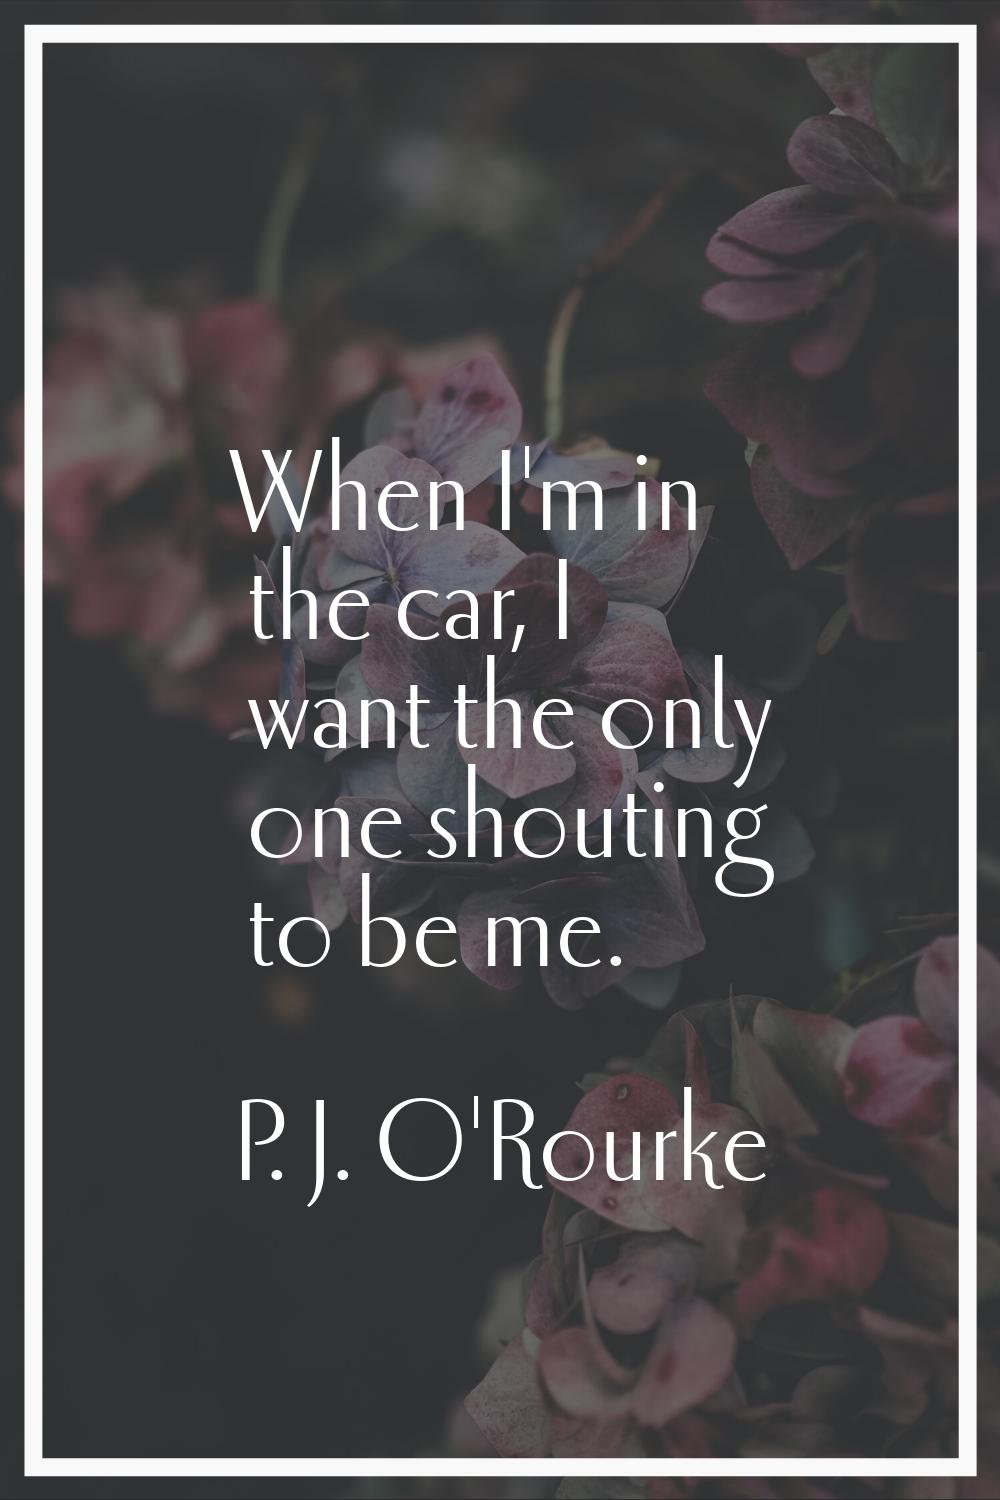 When I'm in the car, I want the only one shouting to be me.